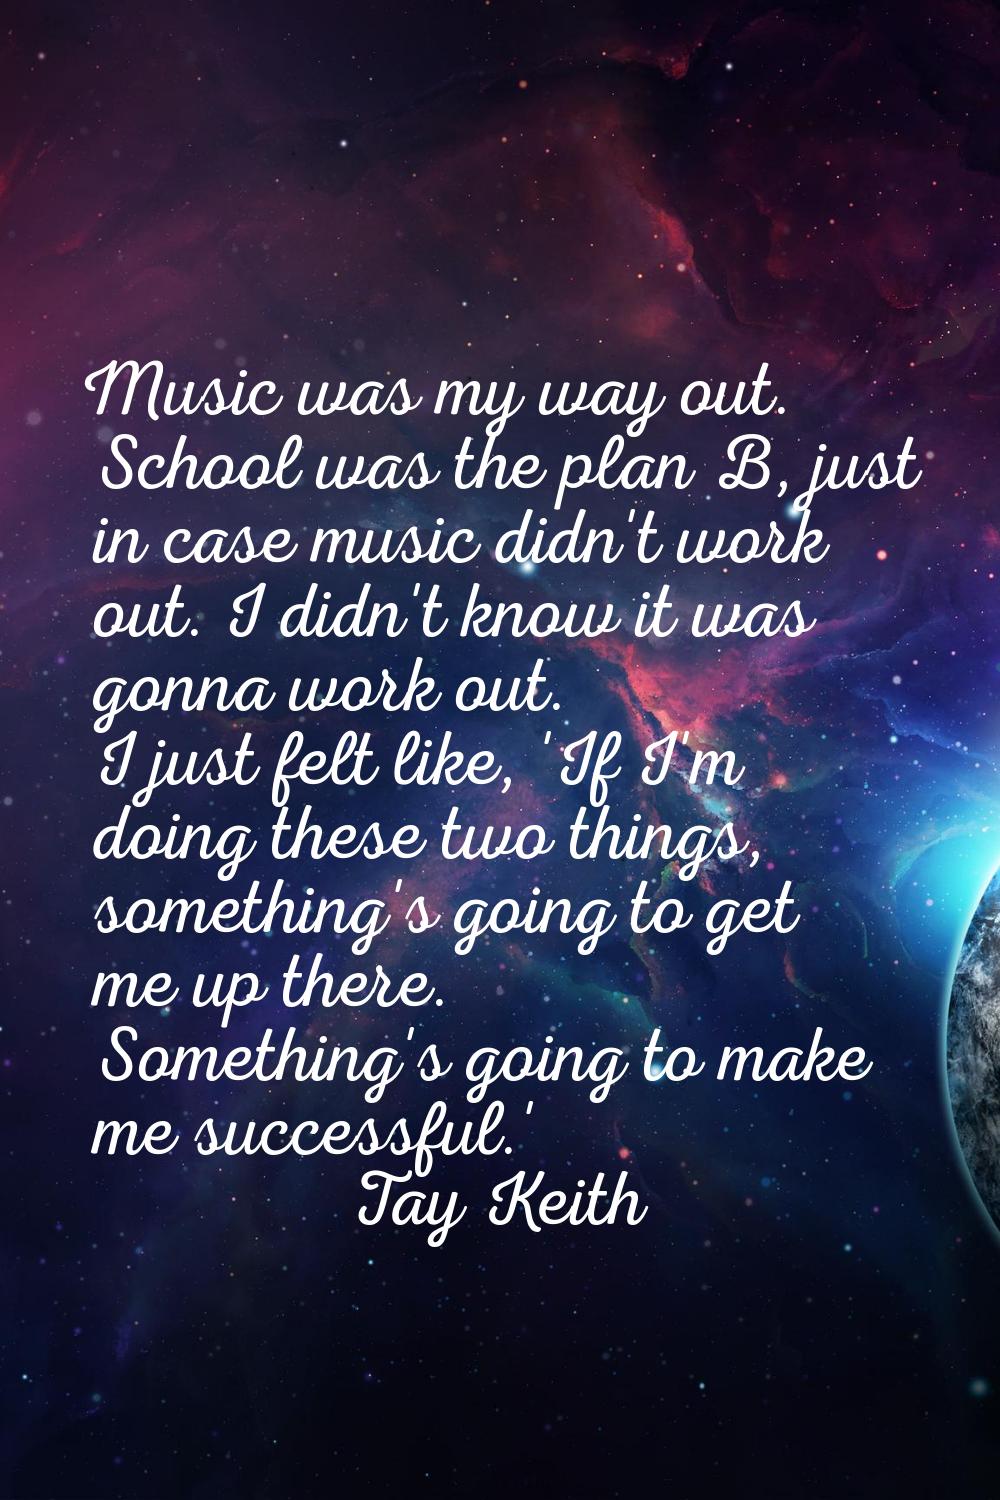 Music was my way out. School was the plan B, just in case music didn't work out. I didn't know it w